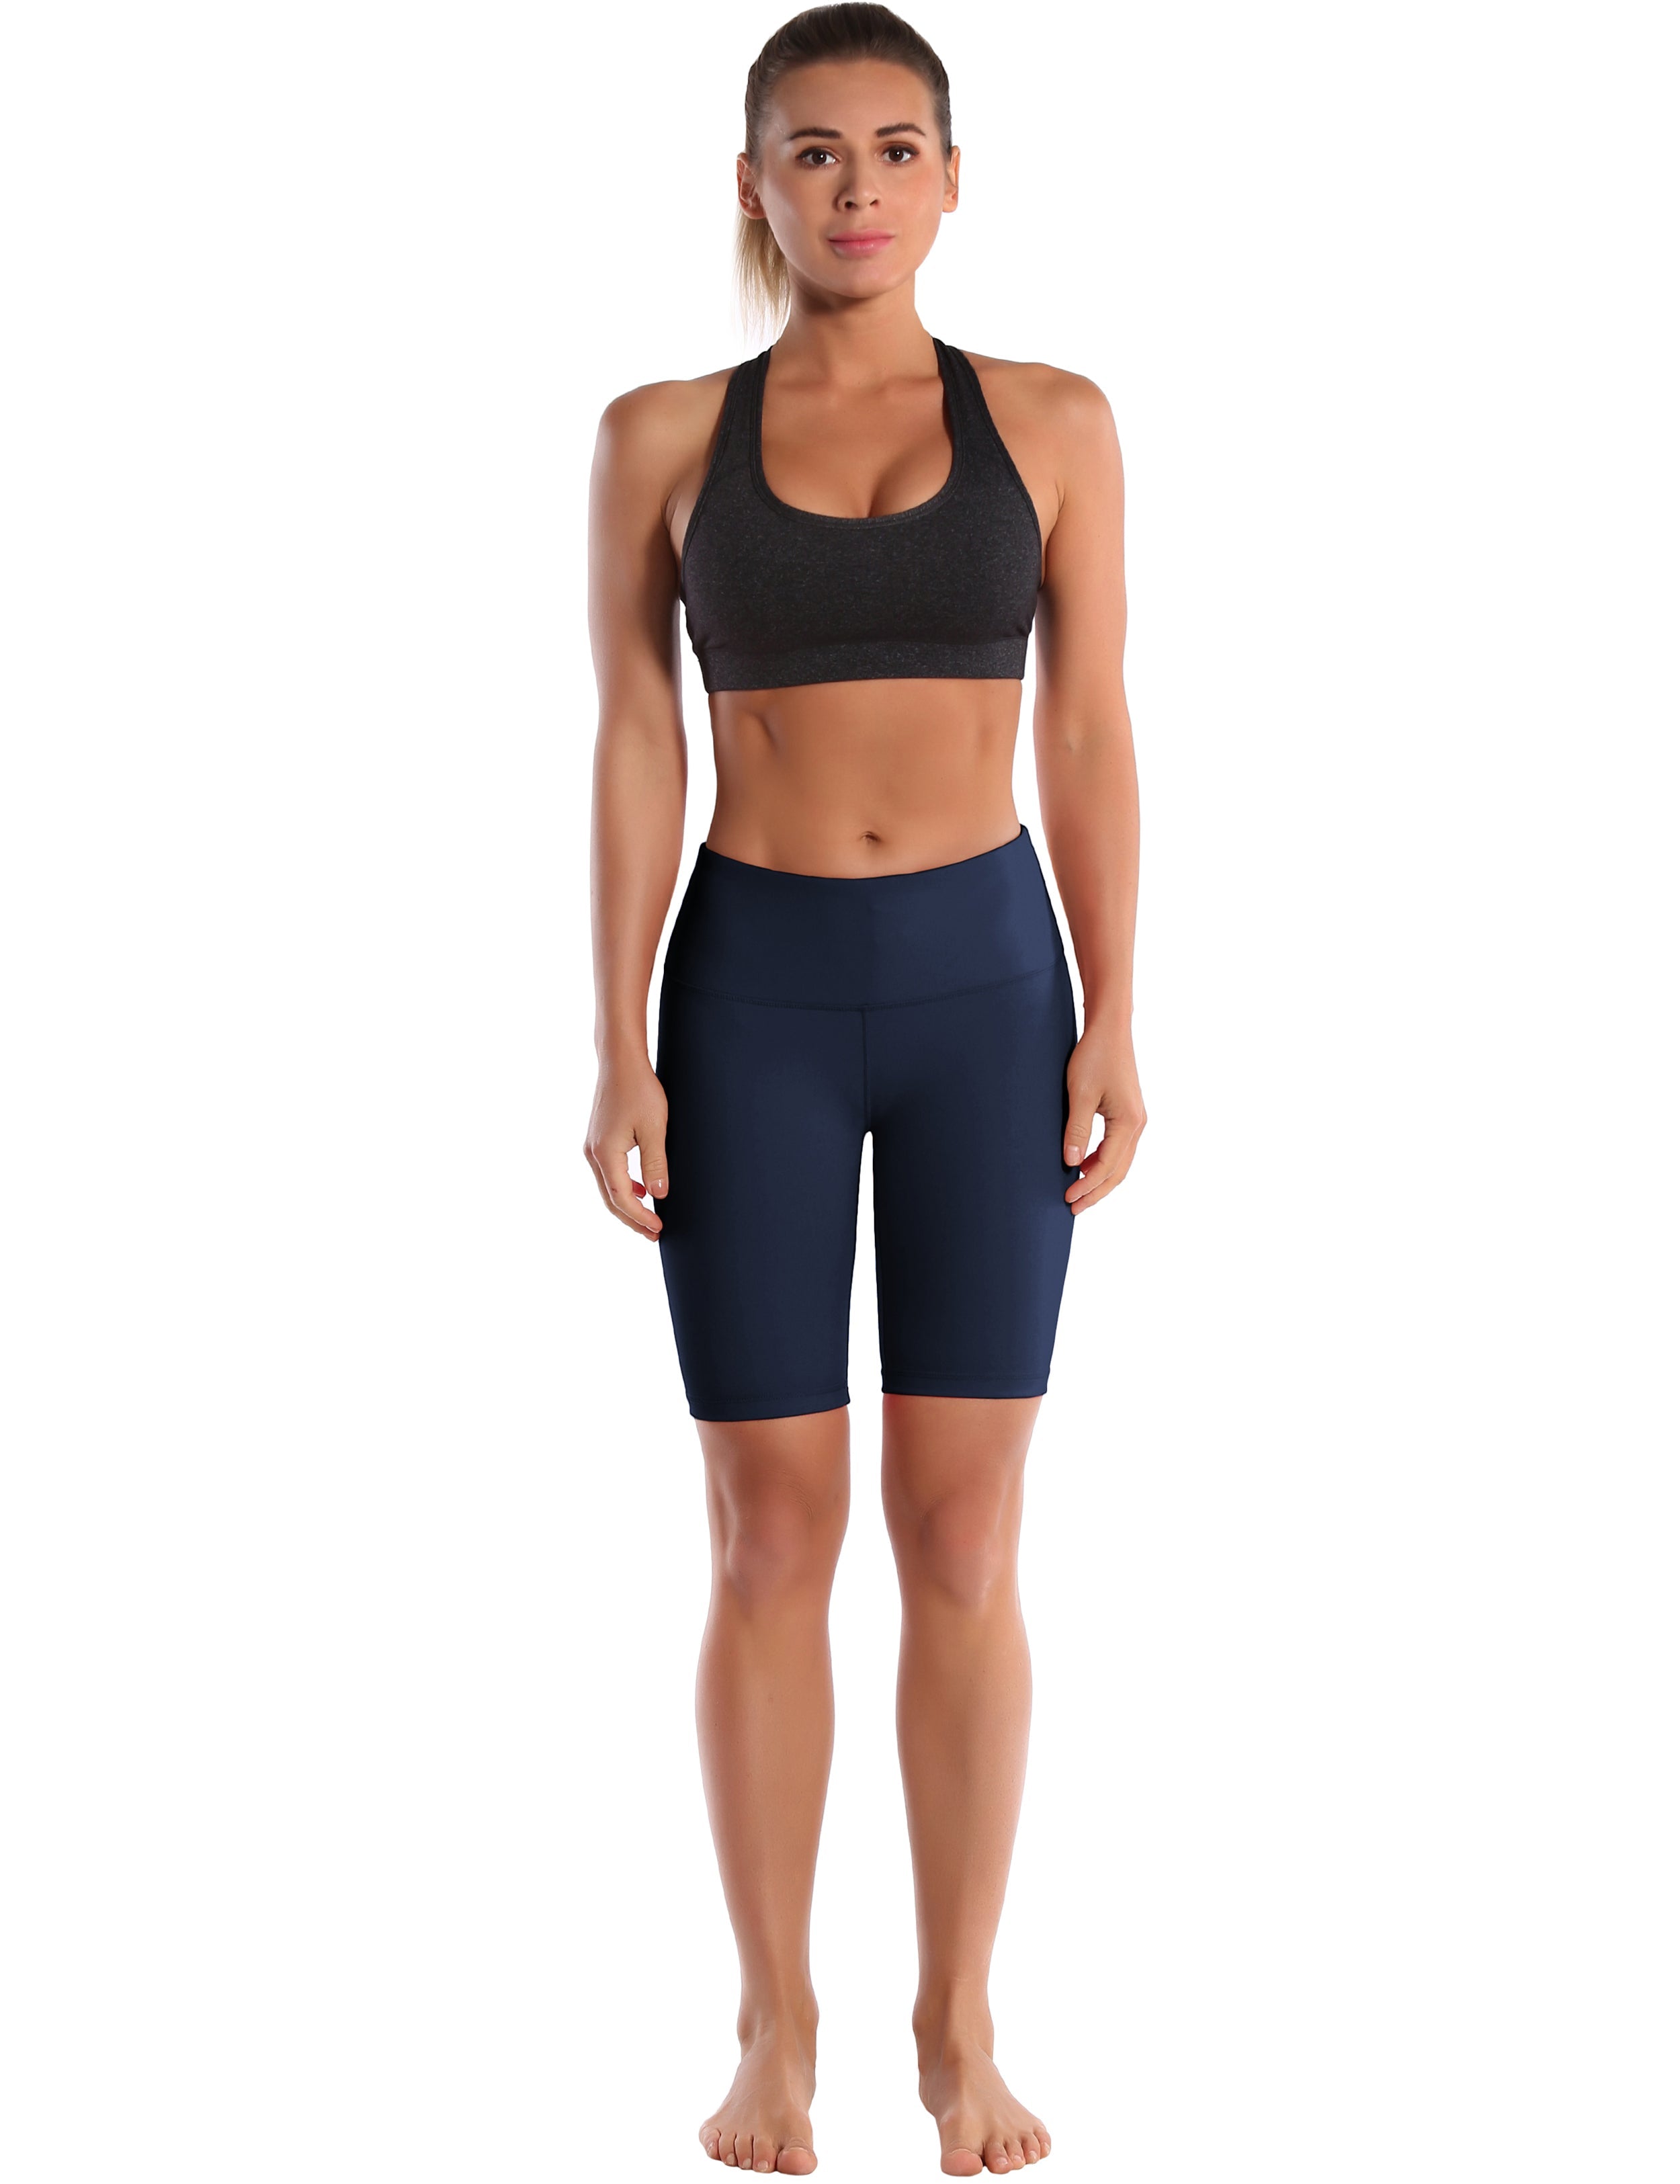 8" High Waist Jogging Shorts darknavy Sleek, soft, smooth and totally comfortable: our newest style is here. Softest-ever fabric High elasticity High density 4-way stretch Fabric doesn't attract lint easily No see-through Moisture-wicking Machine wash 75% Nylon, 25% Spandex